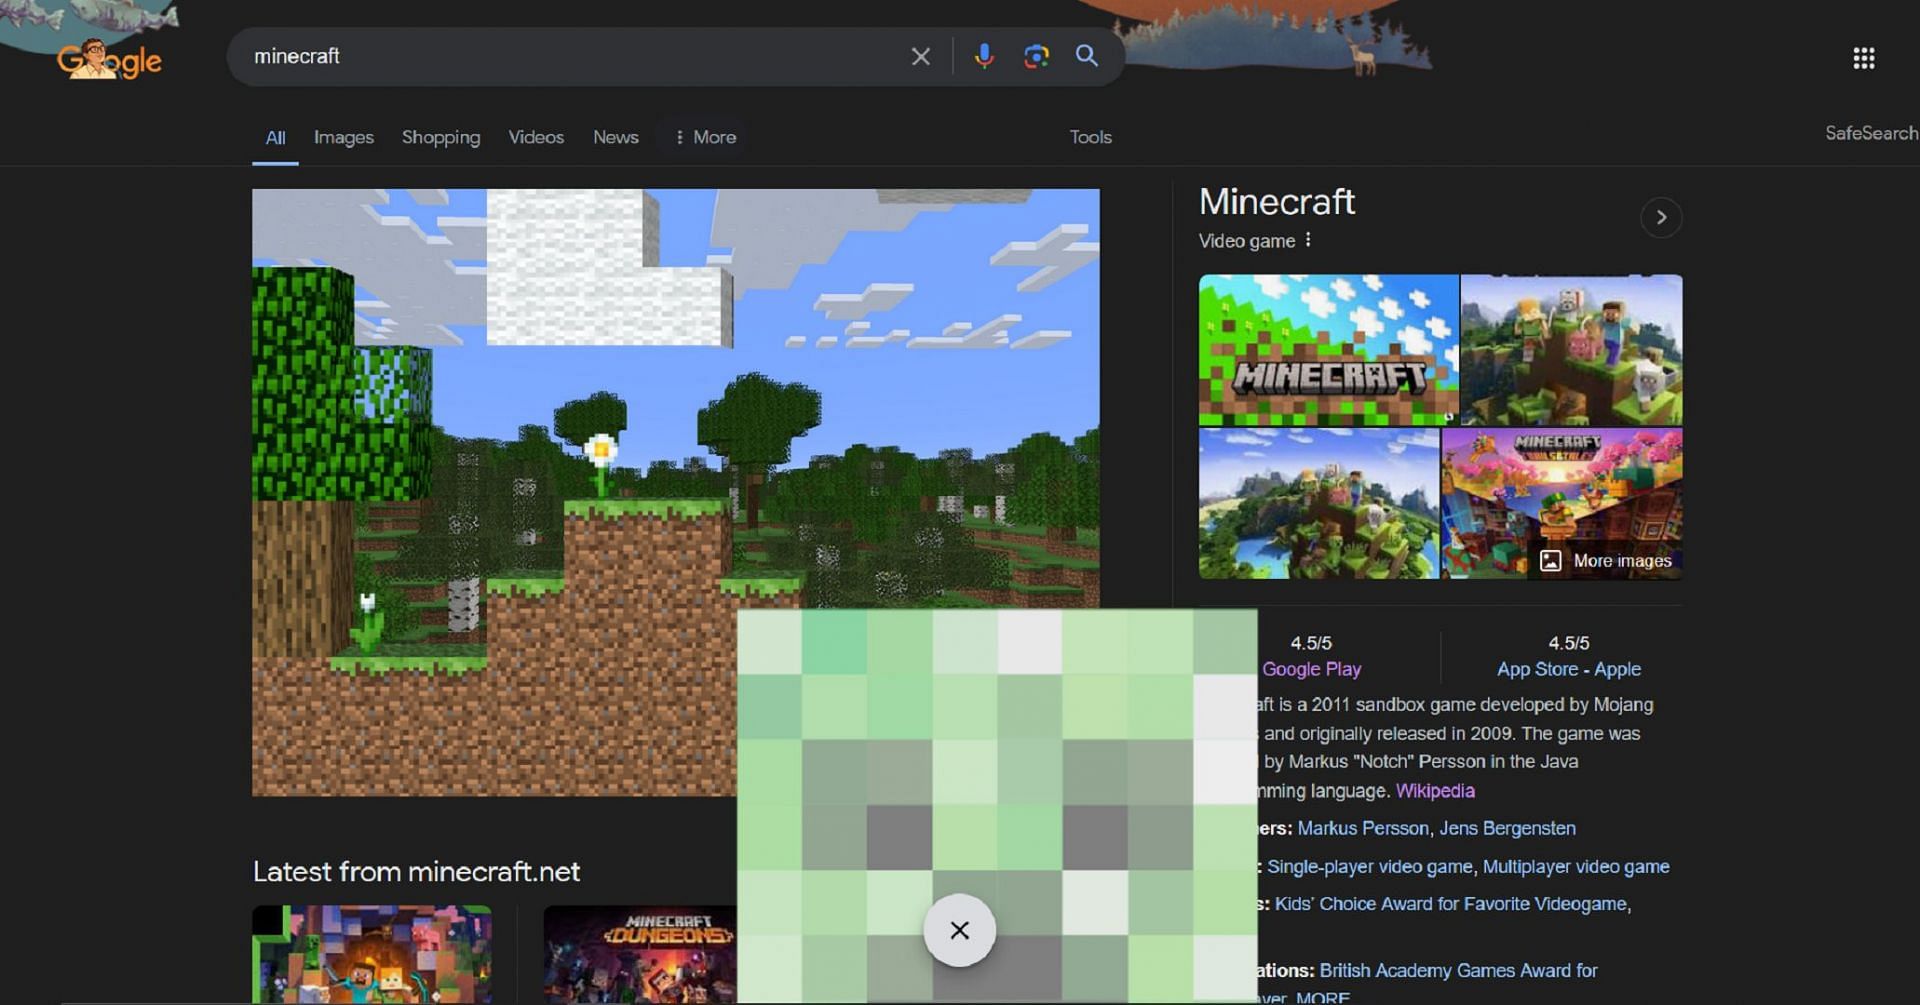 A creeper appears to reset the minigame (Image via Google/Mojang)